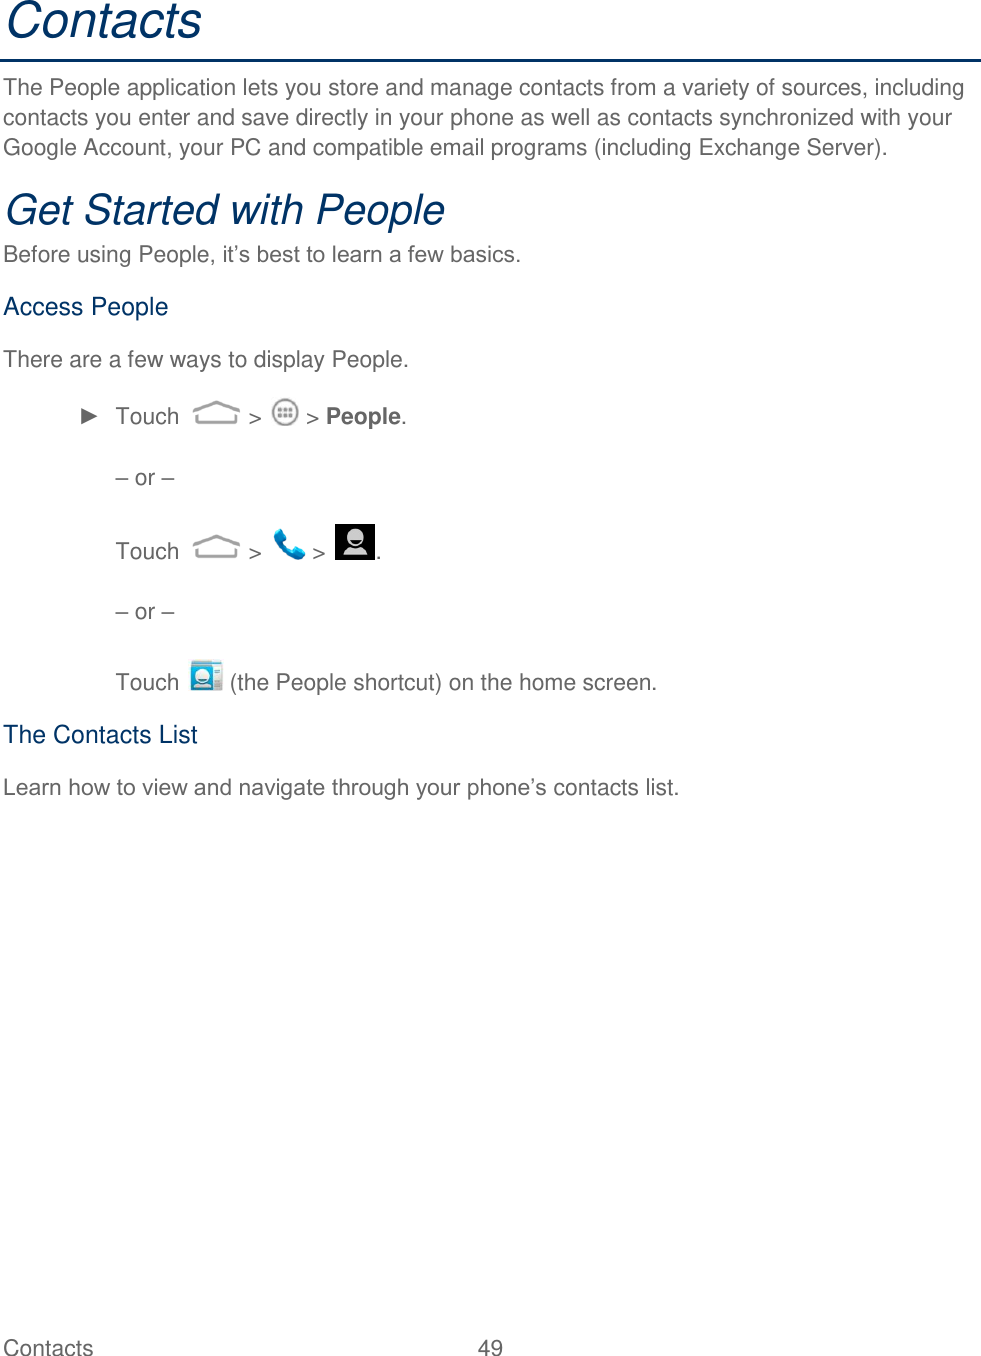 Contacts  49   Contacts The People application lets you store and manage contacts from a variety of sources, including contacts you enter and save directly in your phone as well as contacts synchronized with your Google Account, your PC and compatible email programs (including Exchange Server). Get Started with People Before using People, it‟s best to learn a few basics. Access People There are a few ways to display People. ►  Touch   &gt;   &gt; People.  – or –   Touch   &gt;   &gt;  .  – or –  Touch   (the People shortcut) on the home screen. The Contacts List Learn how to view and navigate through your phone‟s contacts list. 